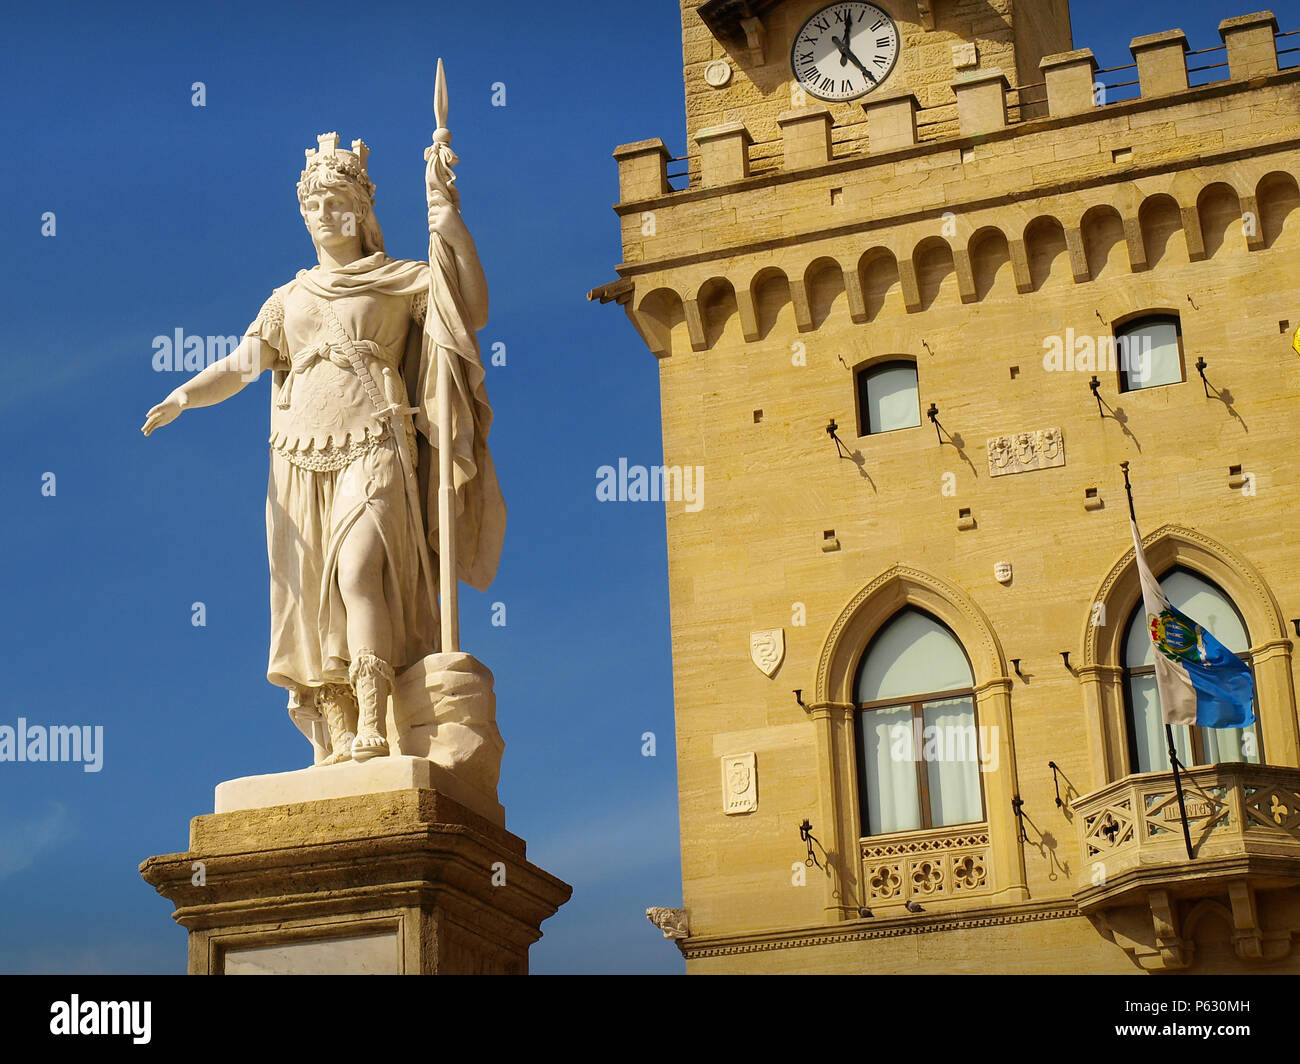 Palazzo Publico - The Public Palace - and The Statue of Liberty in San Marino Stock Photo